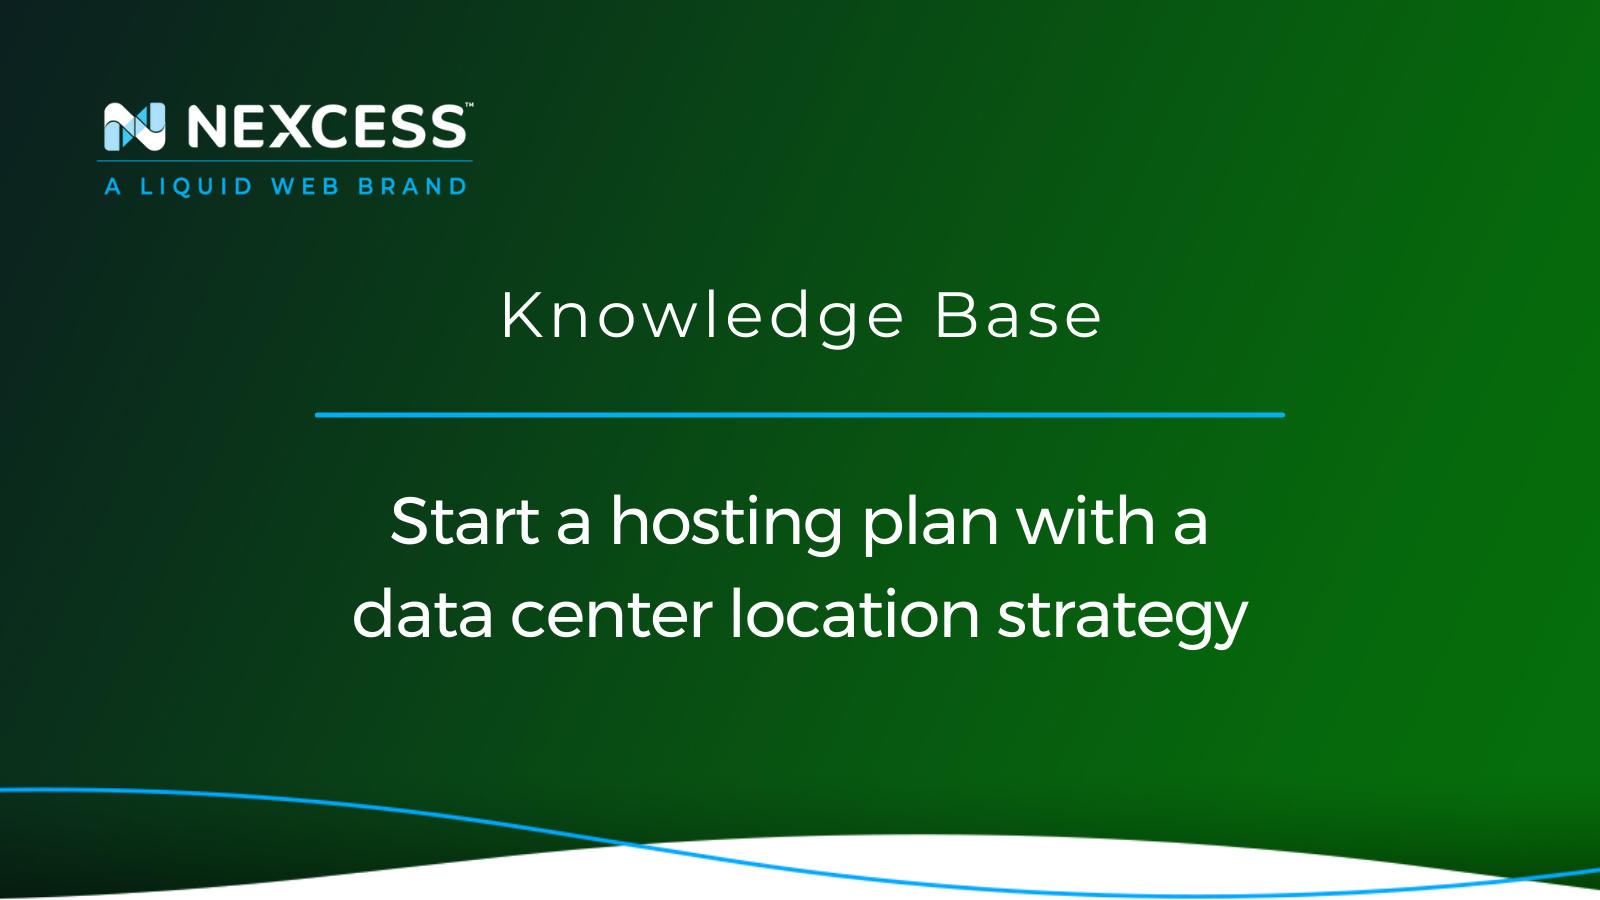 Start a hosting plan with a data center location strategy